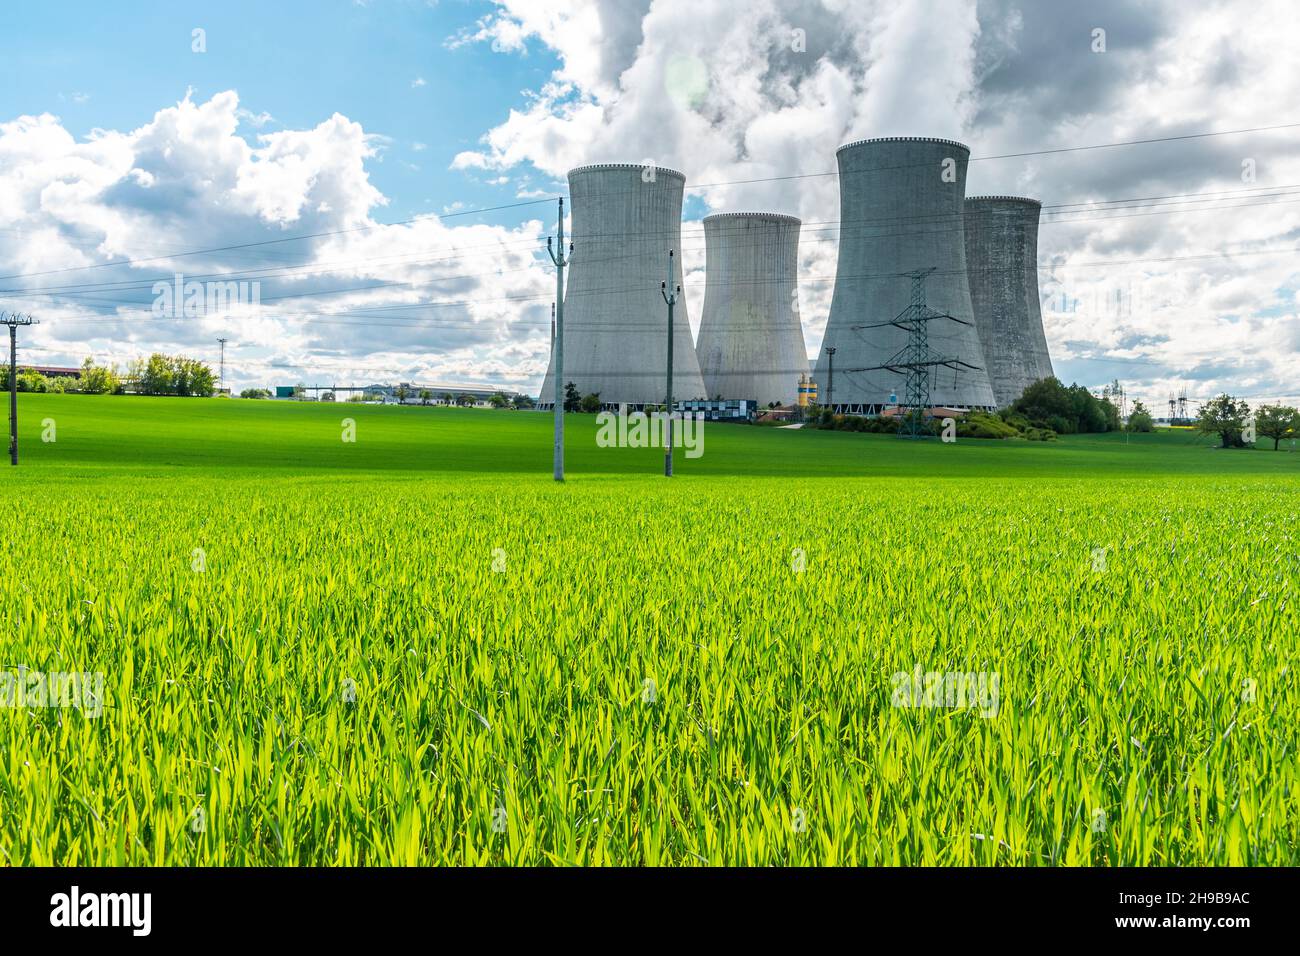 Cooling tower of nuclear power plant behind green grass. Atomic energy. Nuclear power and the environment. Stock Photo